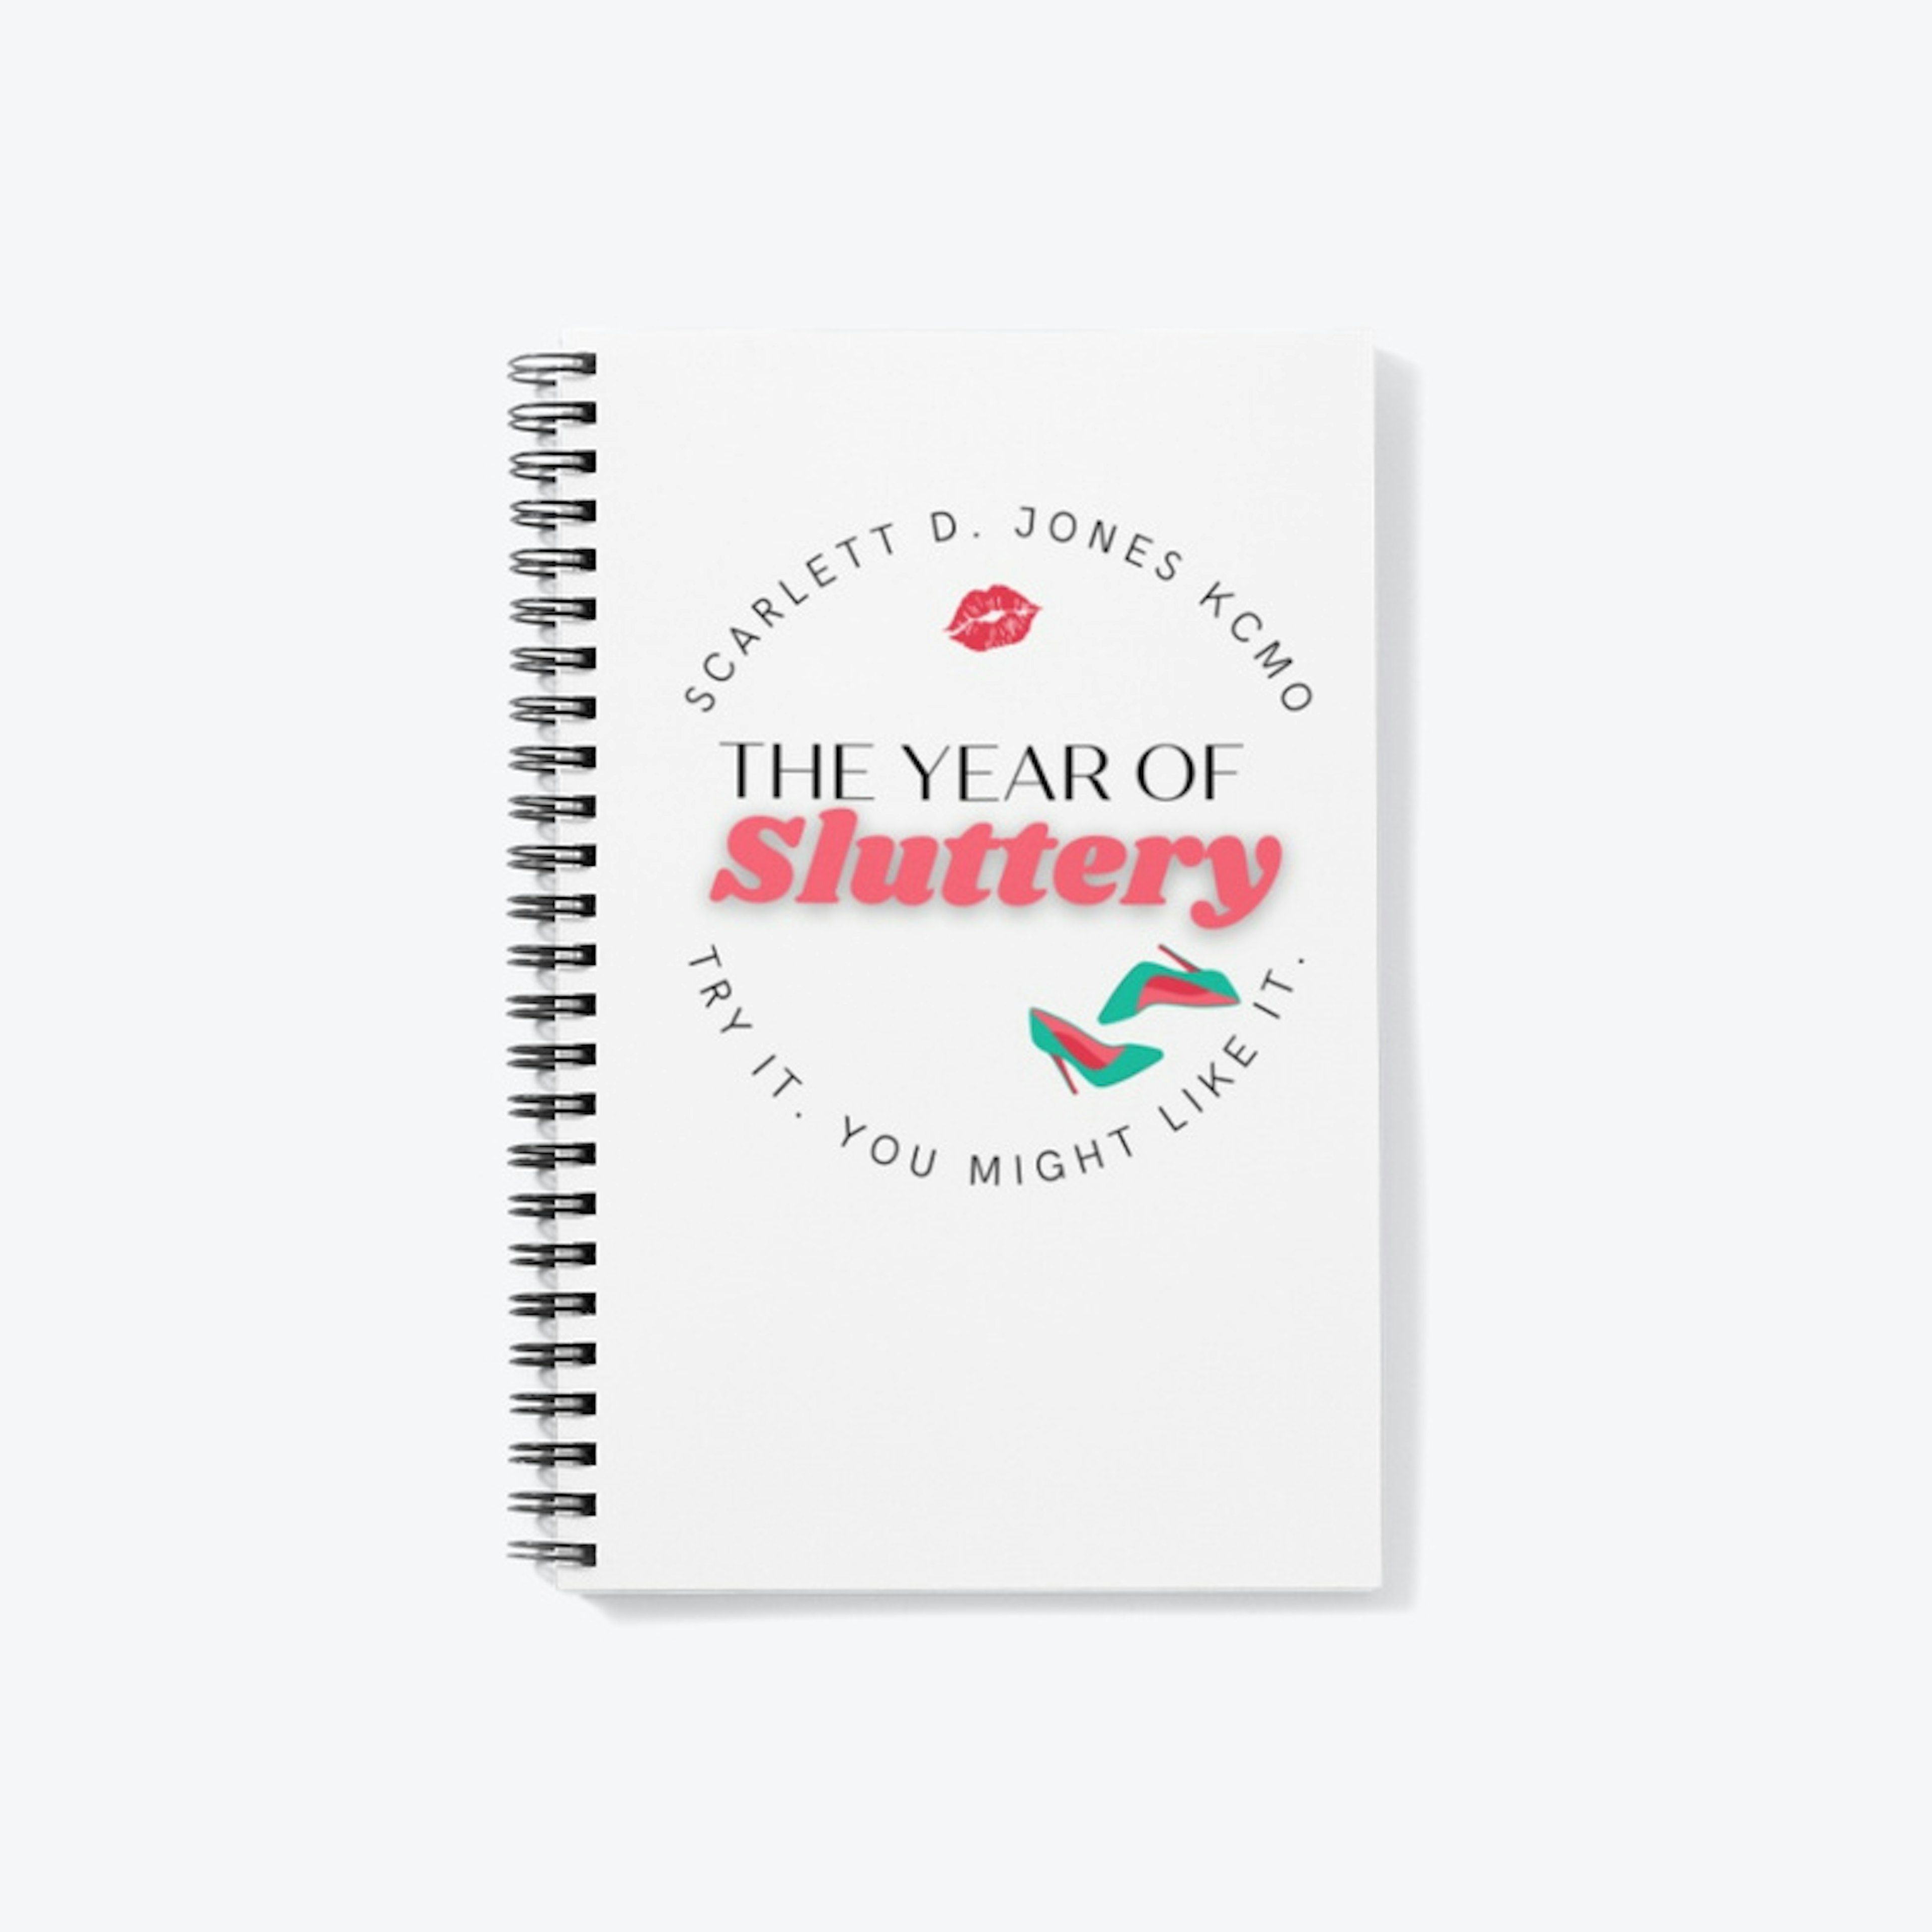 The Year of Sluttery